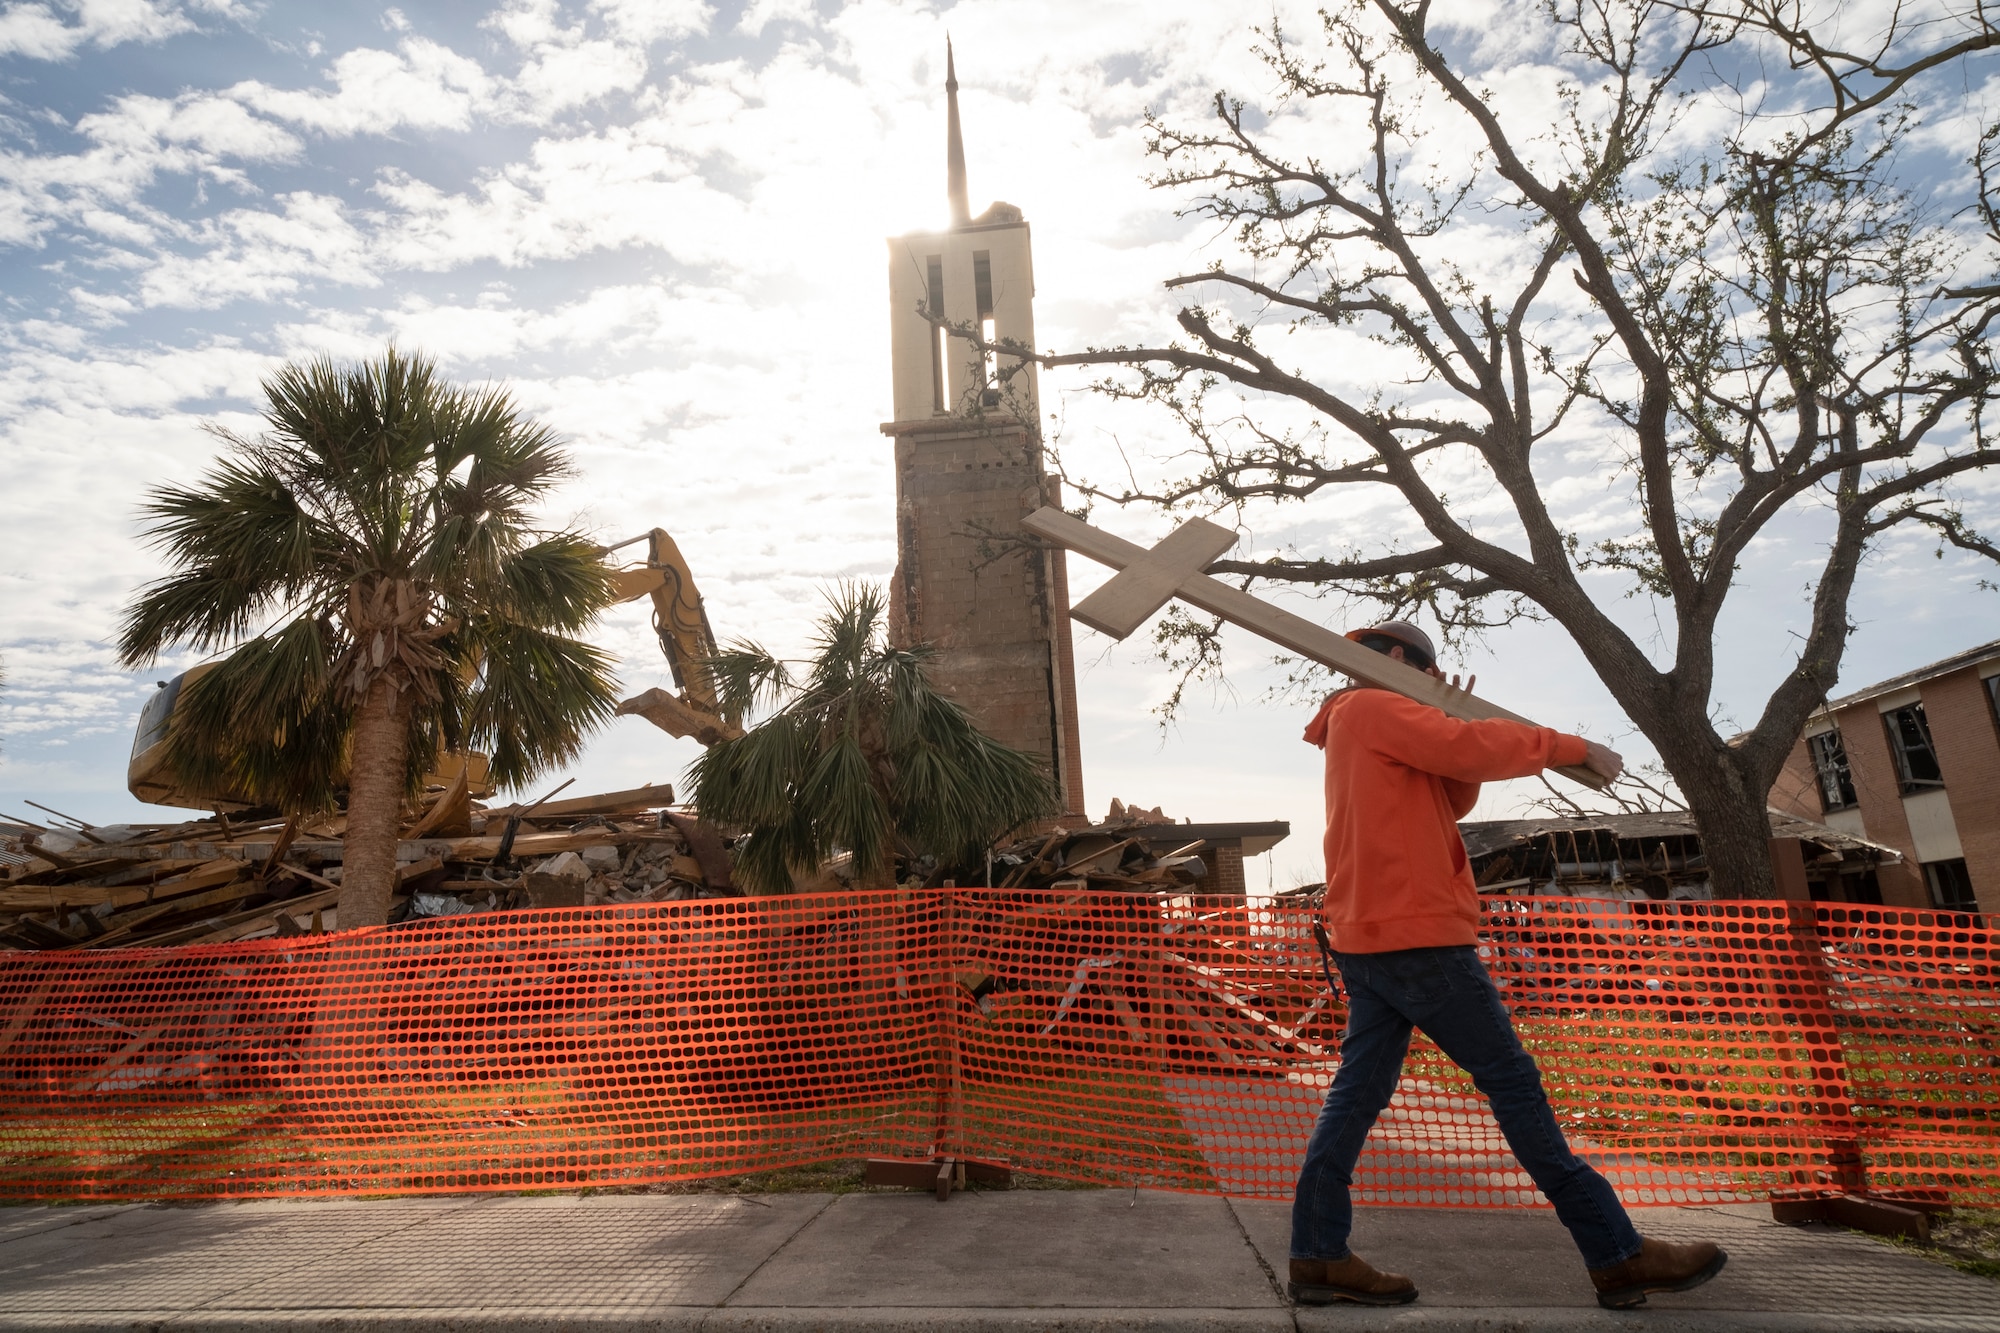 Kylan Nathey, a field operations manager, carries a cross from Chapel 2 at Tyndall Air Force Base, Fla., Feb. 15, 2019. The chapel was severely damaged by Hurricane Michael, a category 4 storm that made landfall on Oct. 10, 2018. The demolition marked the beginning of a long process to clear out damaged structures to make way for new construction. (U.S. Air Force photo by Senior Airman Javier Alvarez)